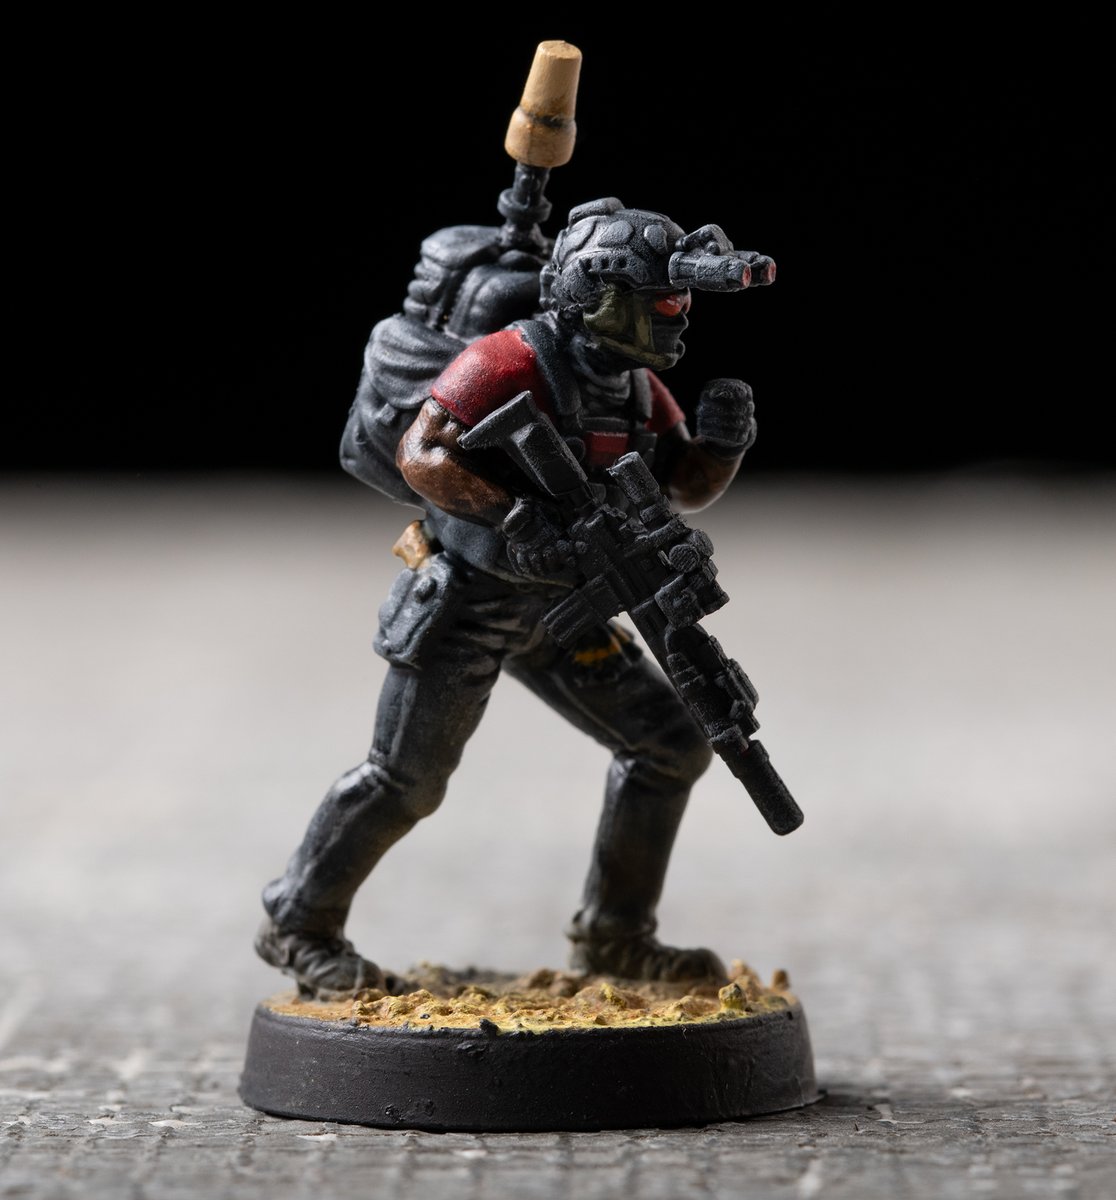 Sneak peak of the new Crisis Troop Scorch Assault Tech mini. Coming in March with the launch of Black Powder Red Earth 28mm Spearhead. #blackpowderredearth #awbariburns #28magchallenge #28mmminiatures #28mmwargaming #tacticool28 #privatemilitarycontracor #eavymetal #wargaming